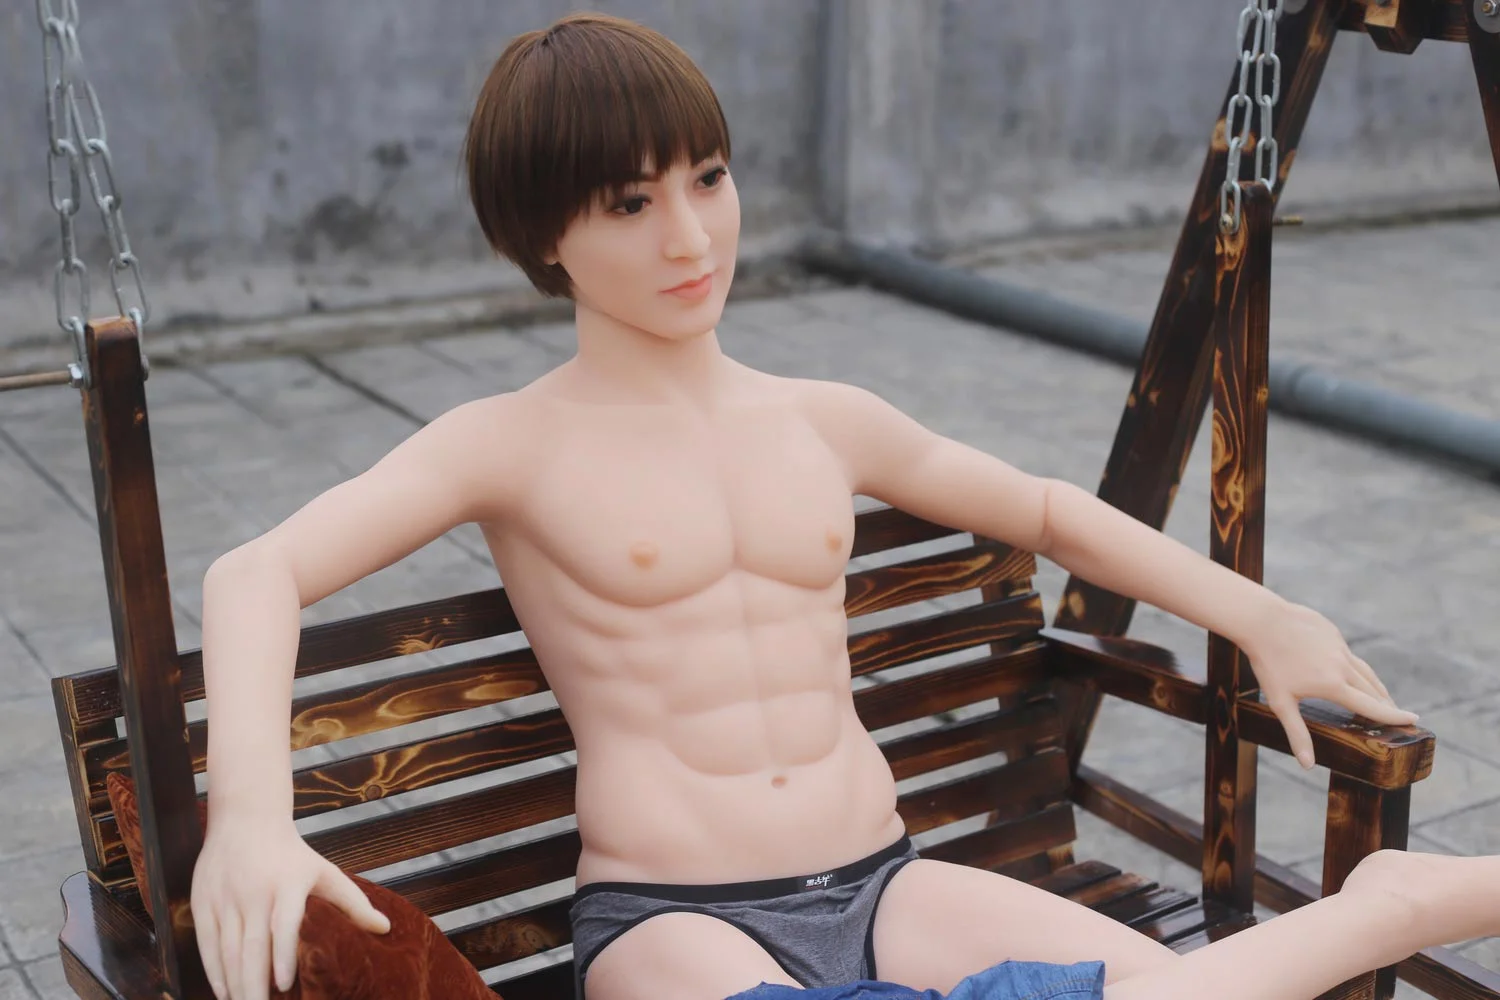 Male-sex-doll-with-short-brown-hair